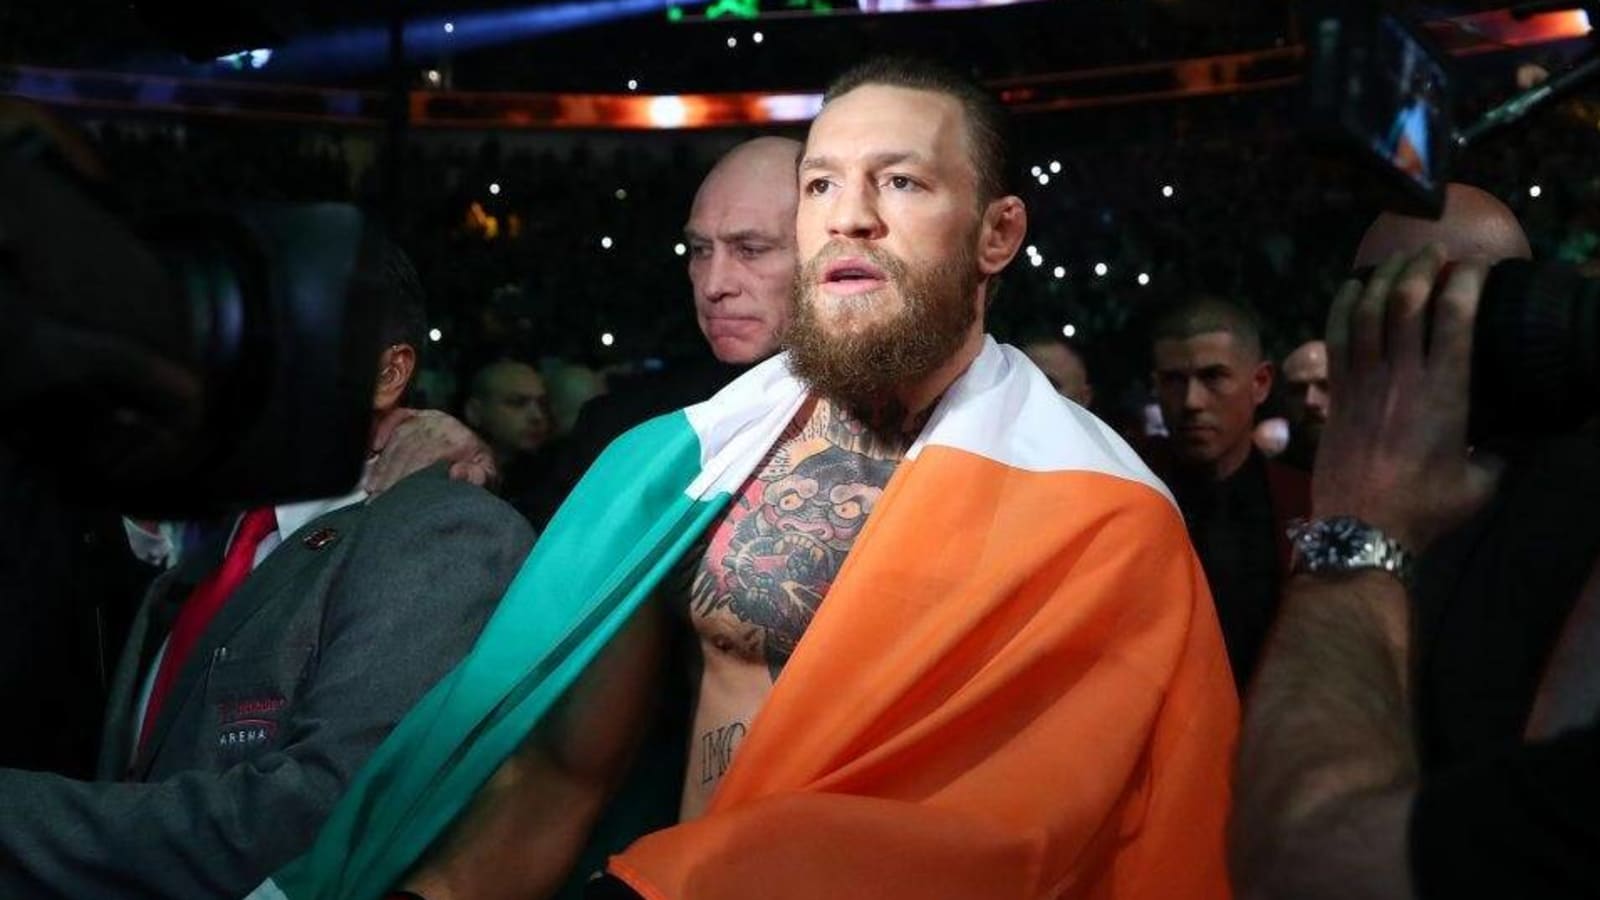 UFC star Conor McGregor arrested for alleged dangerous driving